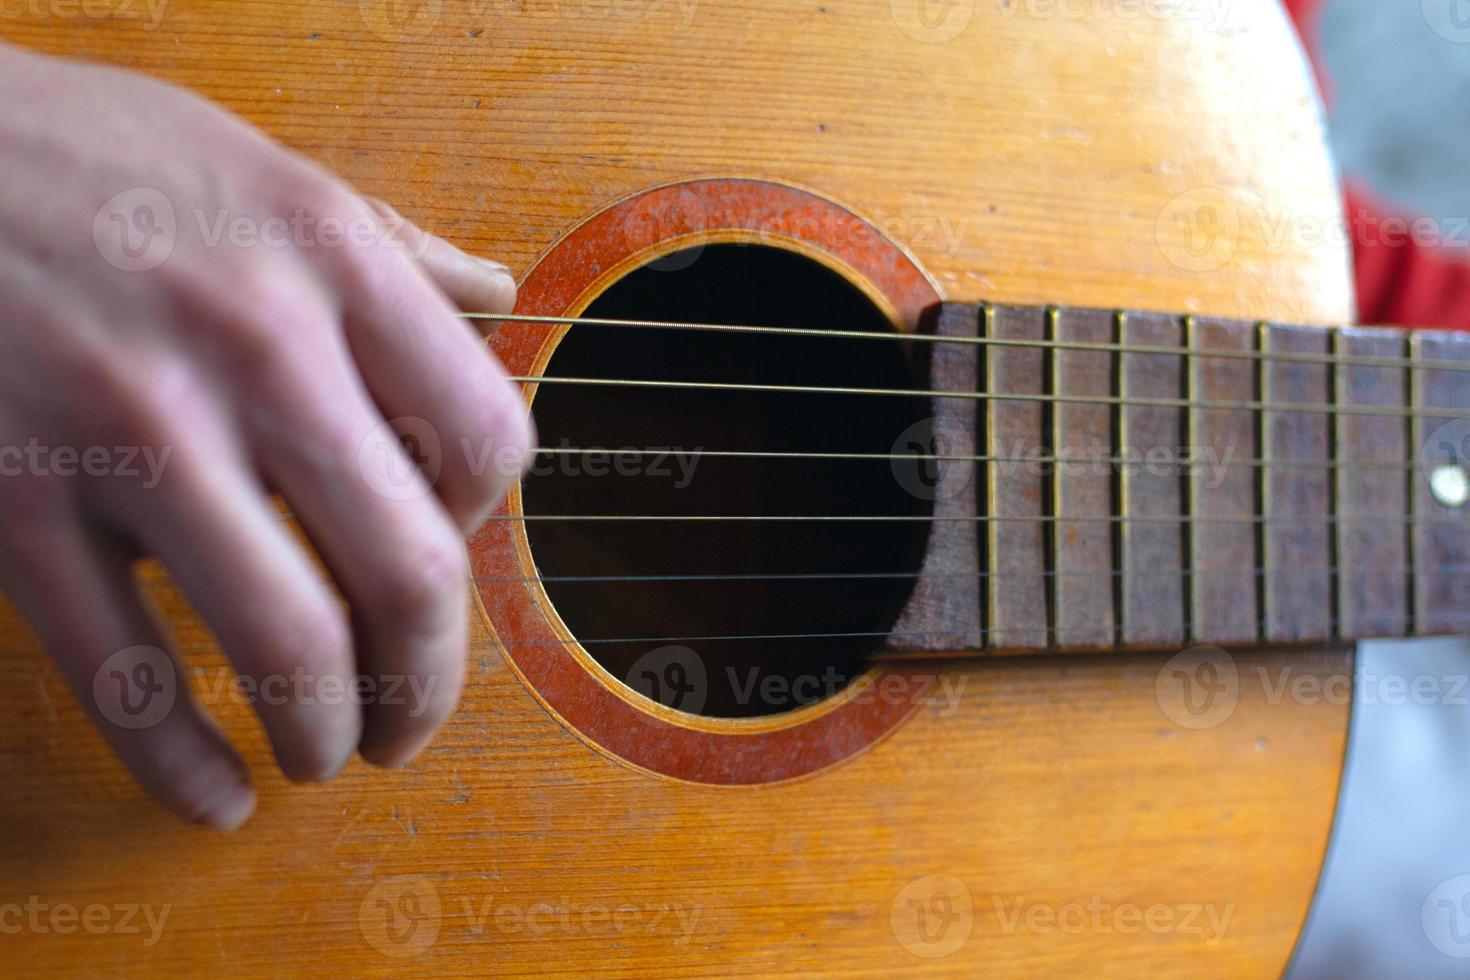 Fingers play the strings on a classic acoustic guitar photo